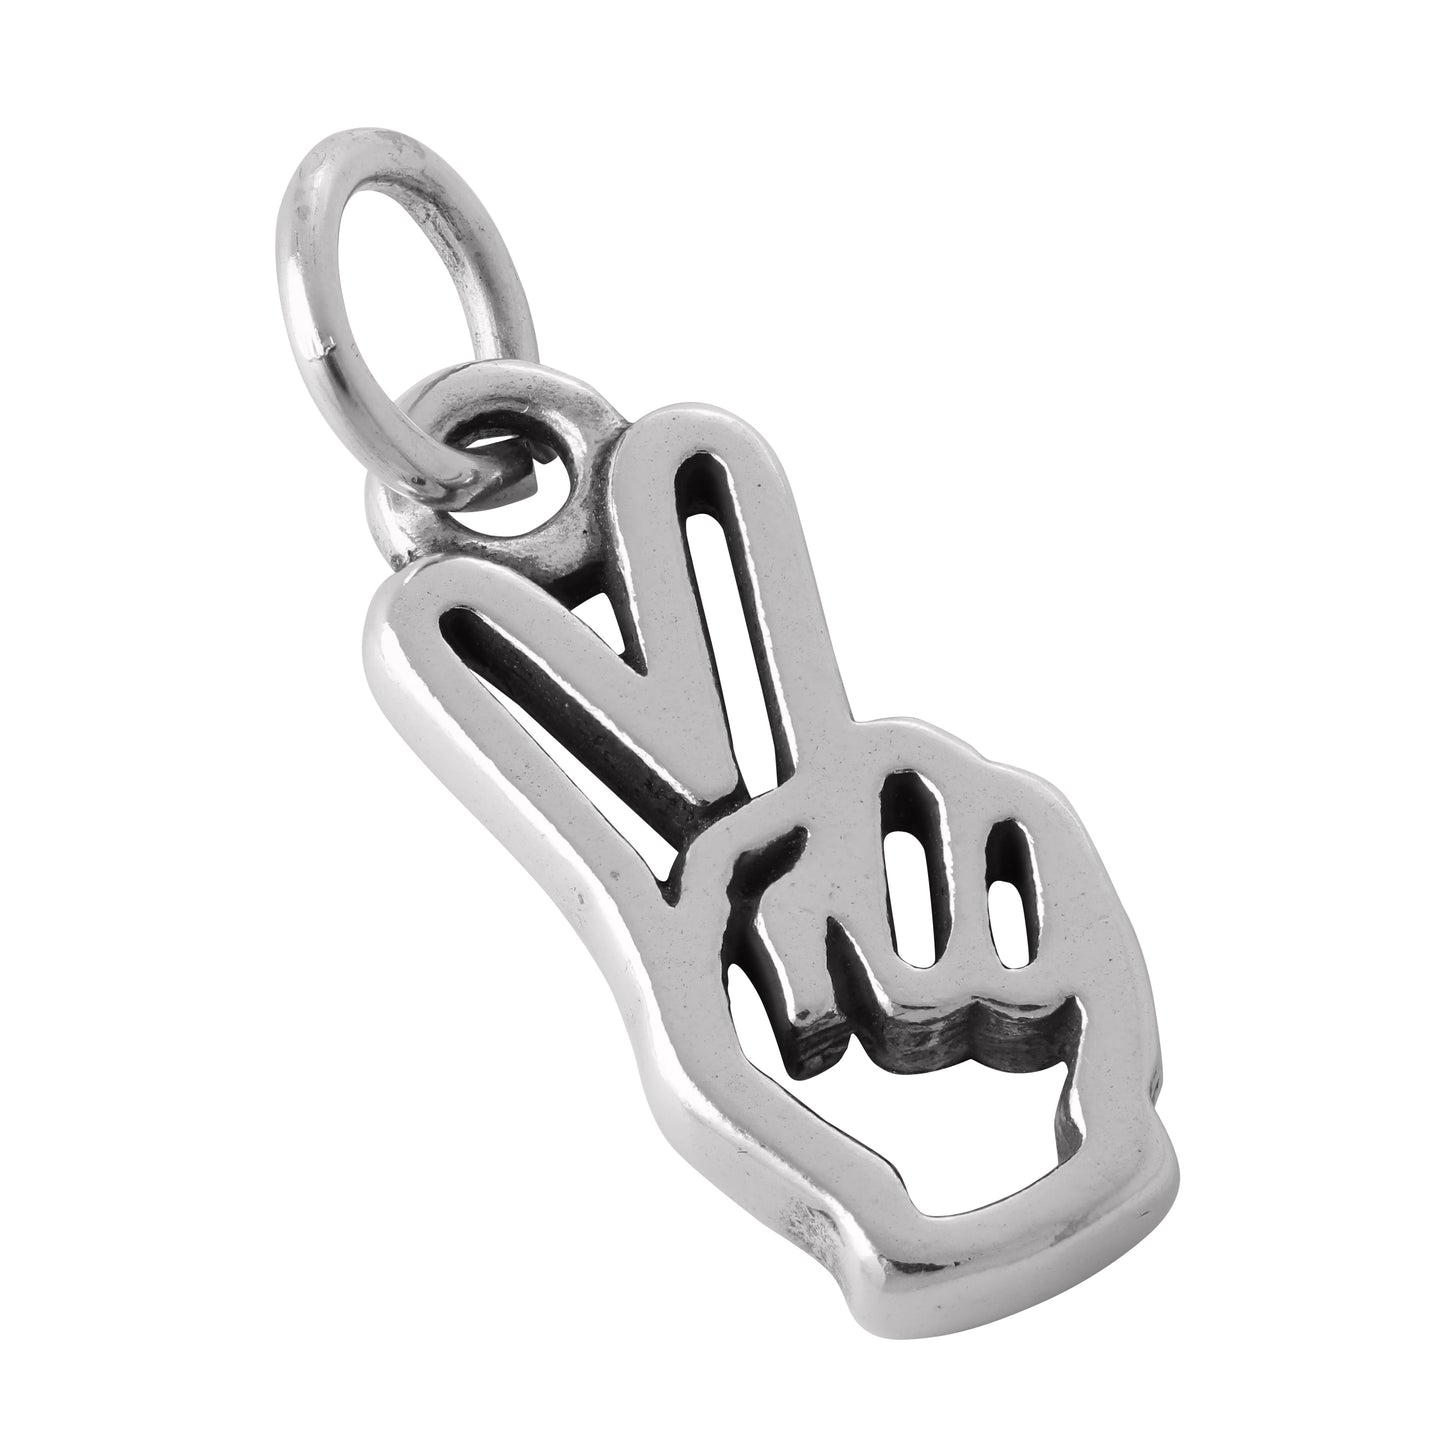 Sterling Silver Peace Charm